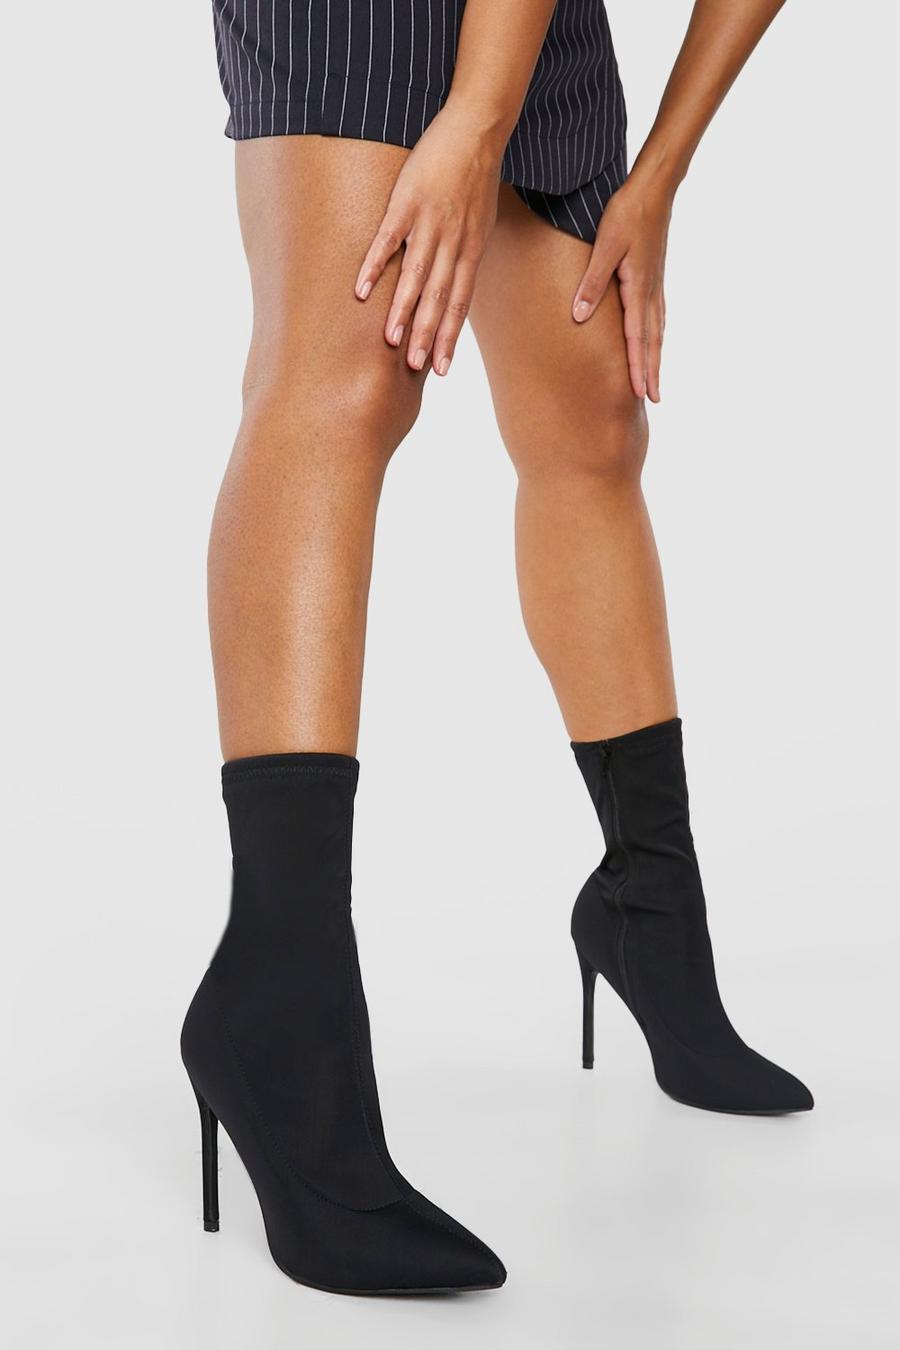 Black Pointed Toe Stiletto Sock Boots